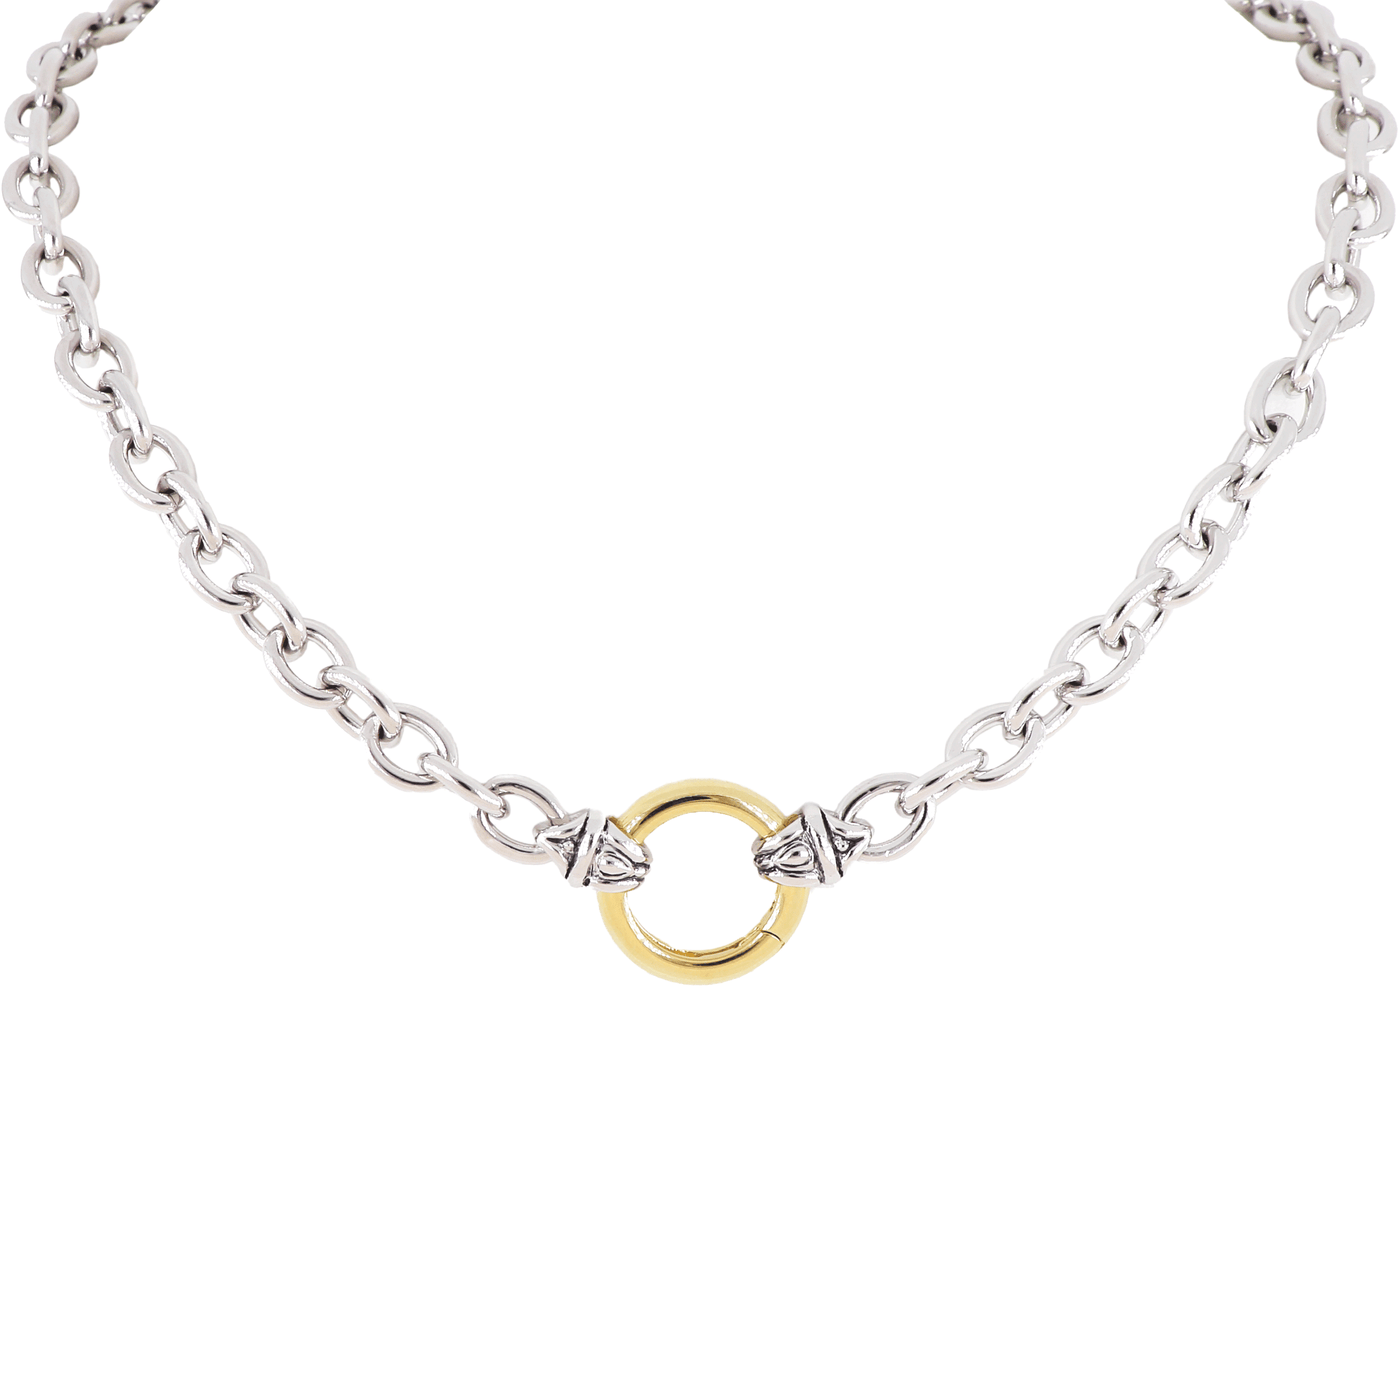 20th Anniversary Collection - Large Link Spring Ring Two-Tone Necklace